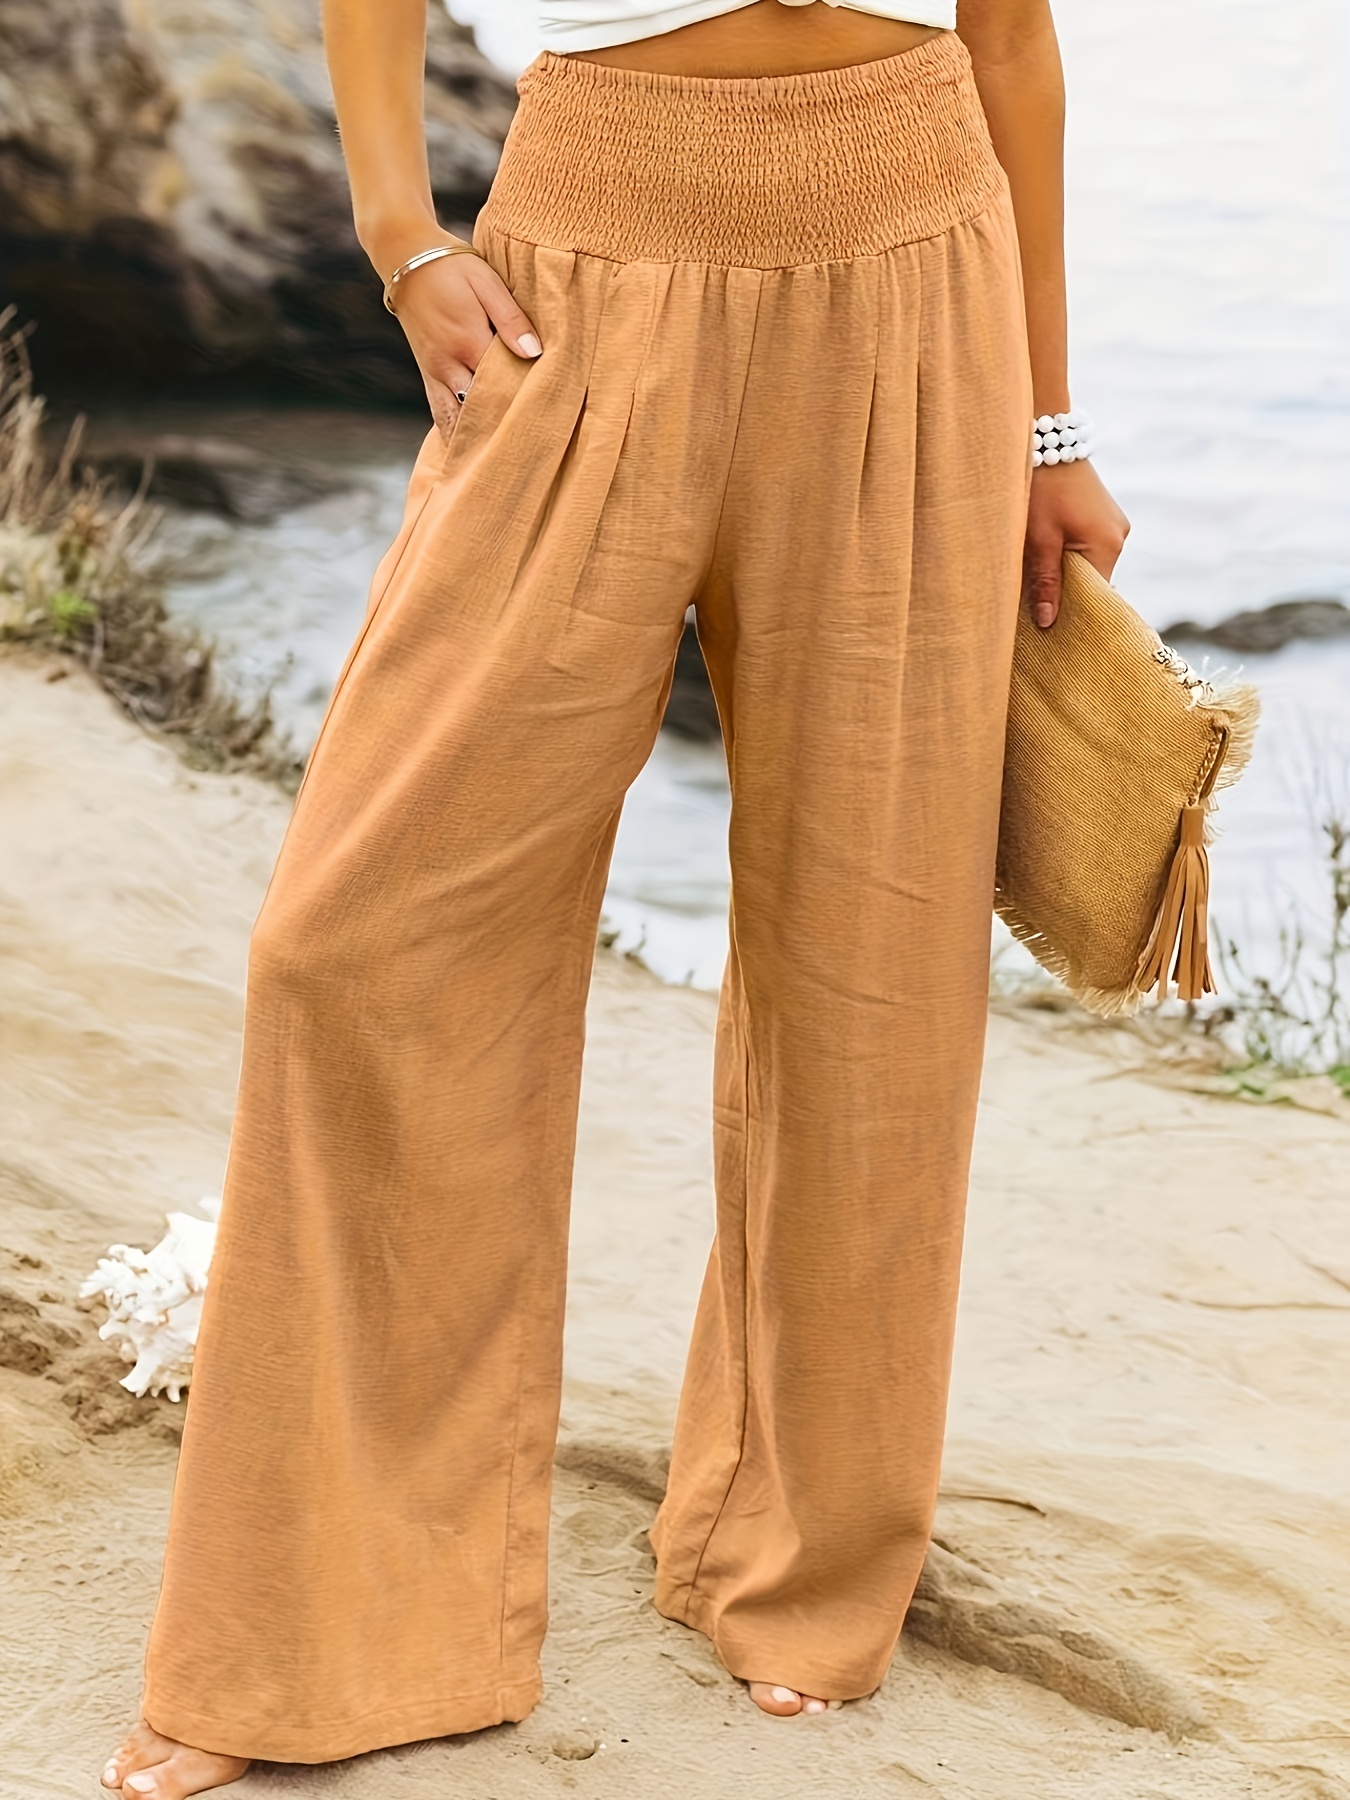 Women Casual Loose Cotton Linen Pants with Pocket Lady Spring Fall High  Waist Wide Leg Trousers Solid Color Shirred Pants Outfit 